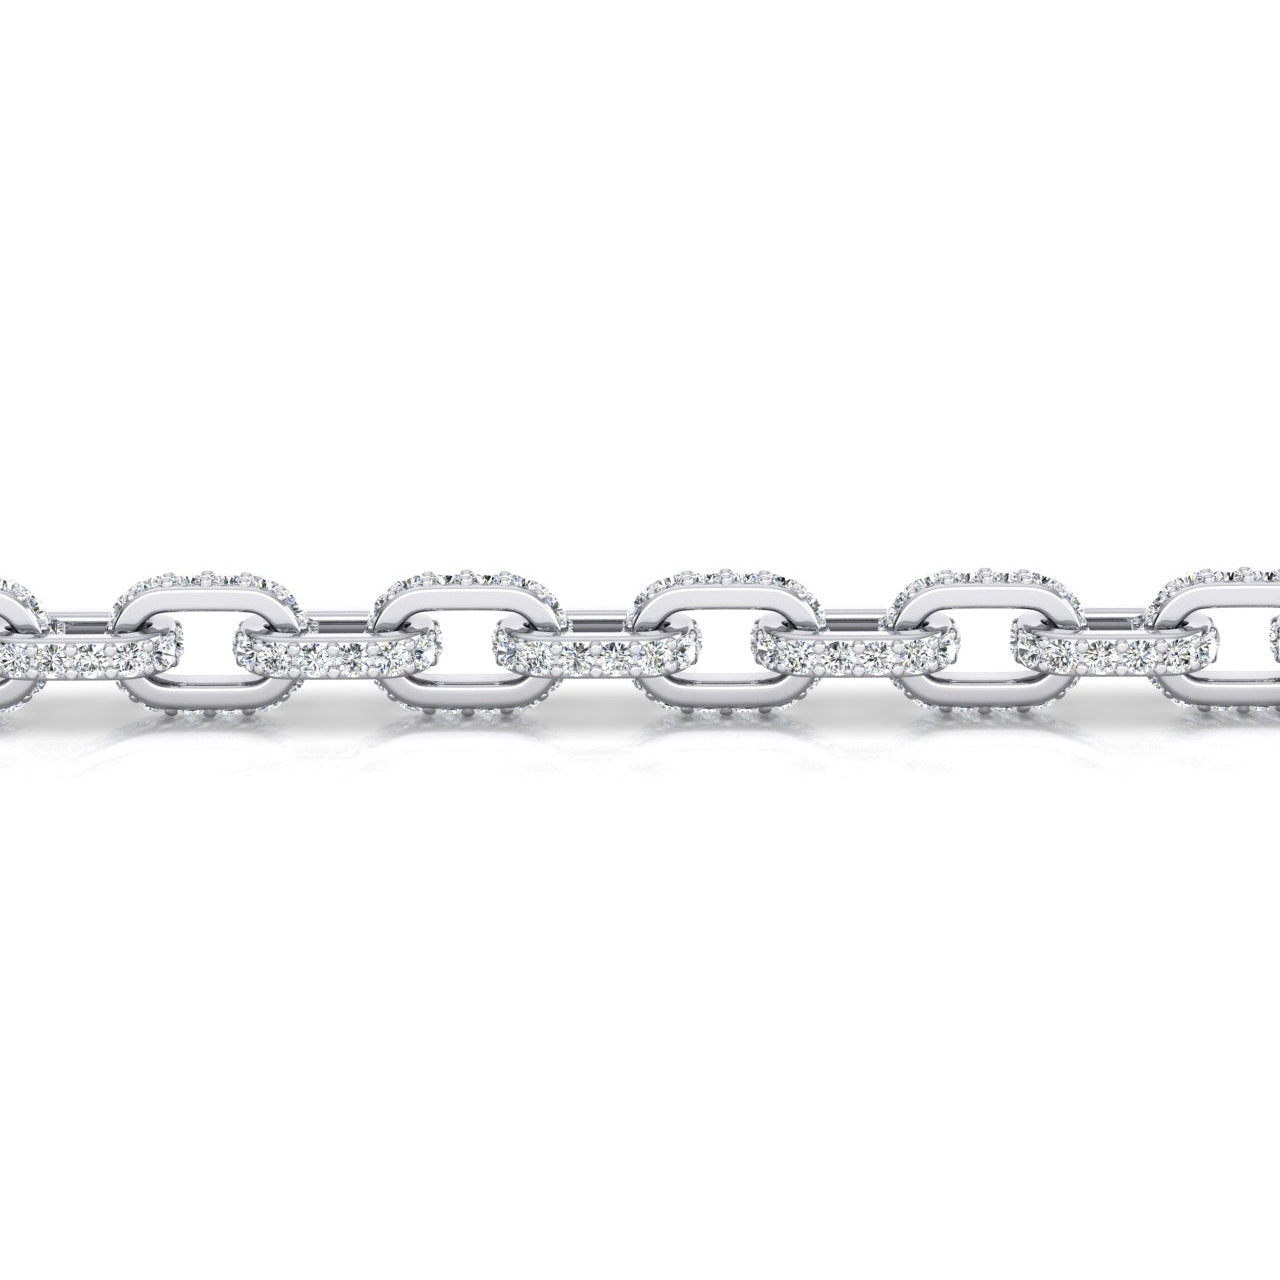 Real Diamond Chain Necklace Hermes Style 6.5 mm 9.25 Carats